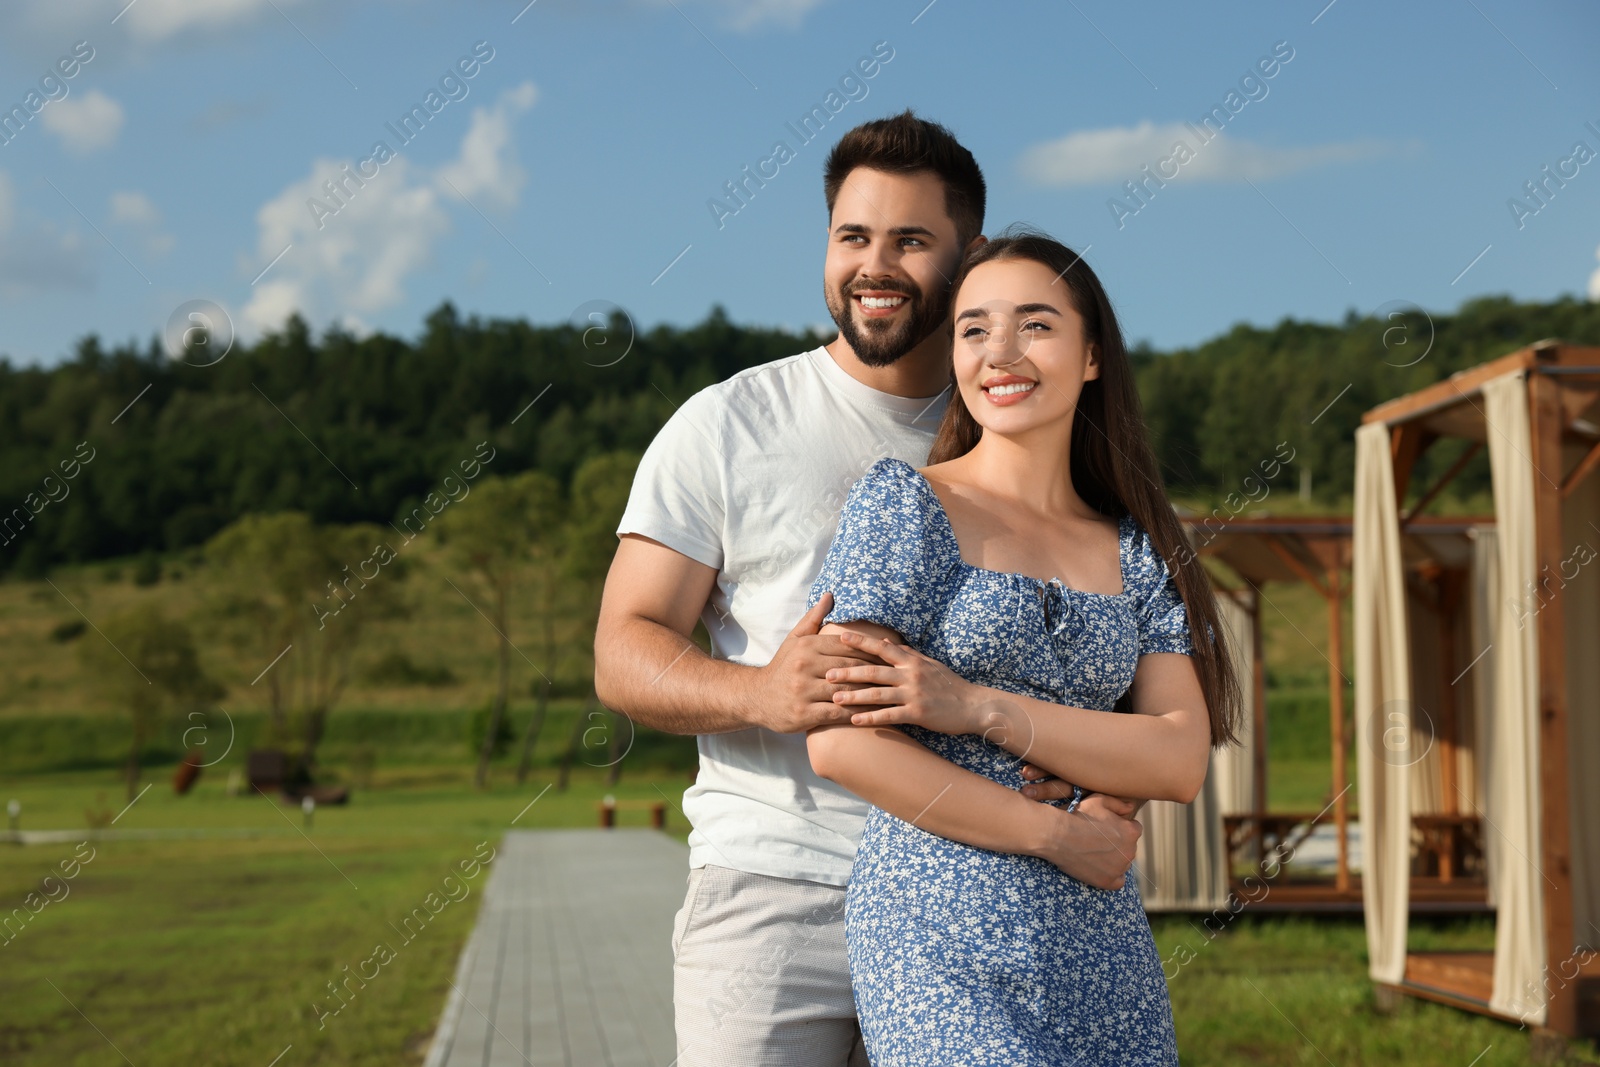 Photo of Romantic date. Beautiful couple spending time together outdoors, space for text